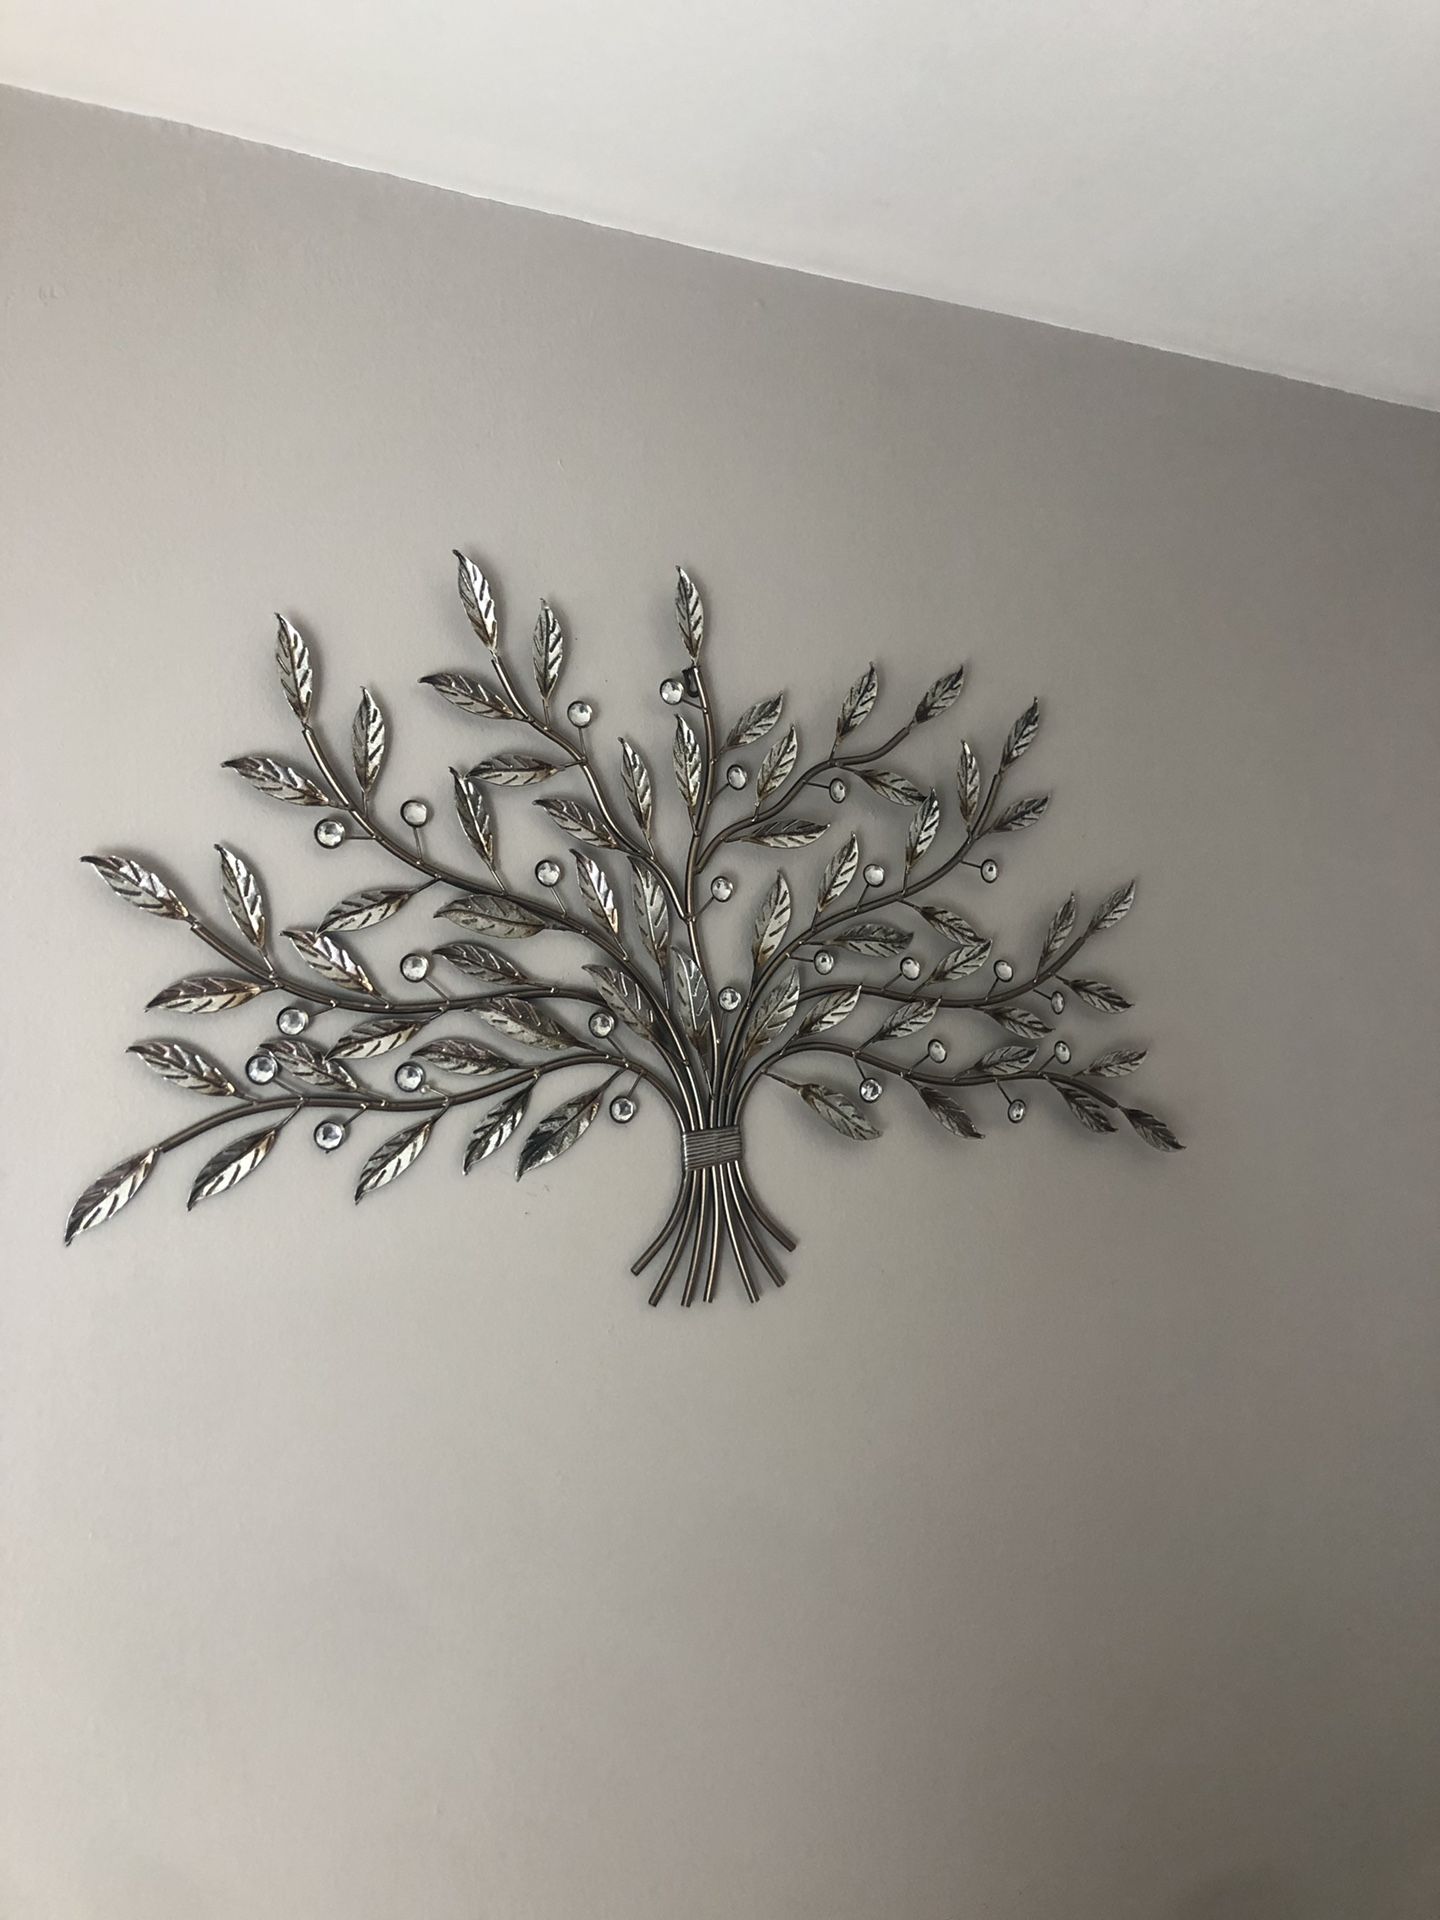 Call wall decoration it’s made of silver metal